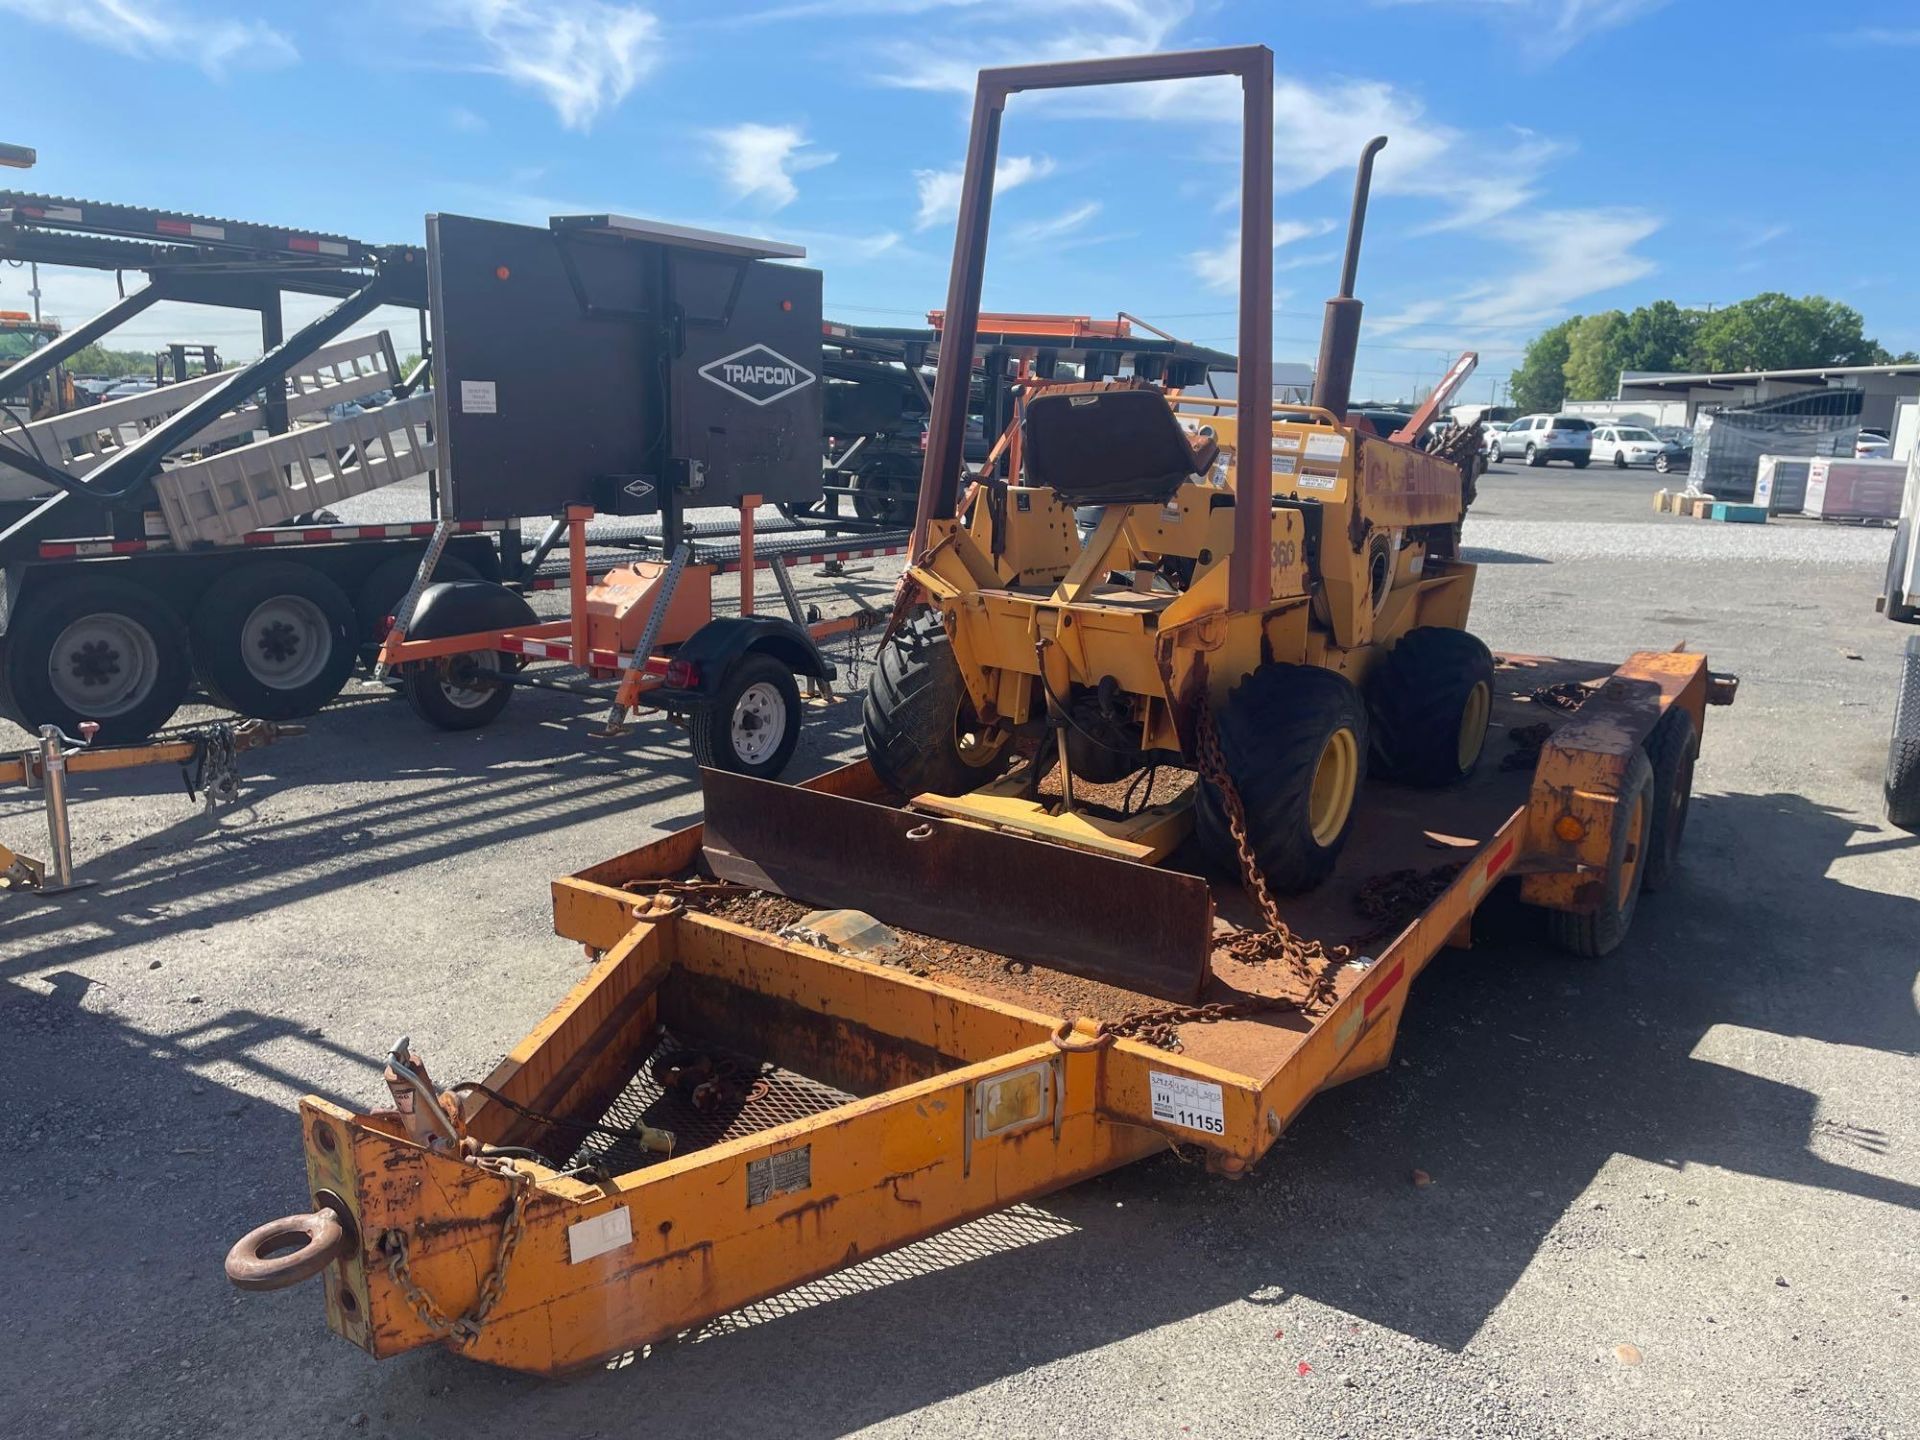 1988 Dixie Trailer with Case 360 Trencher